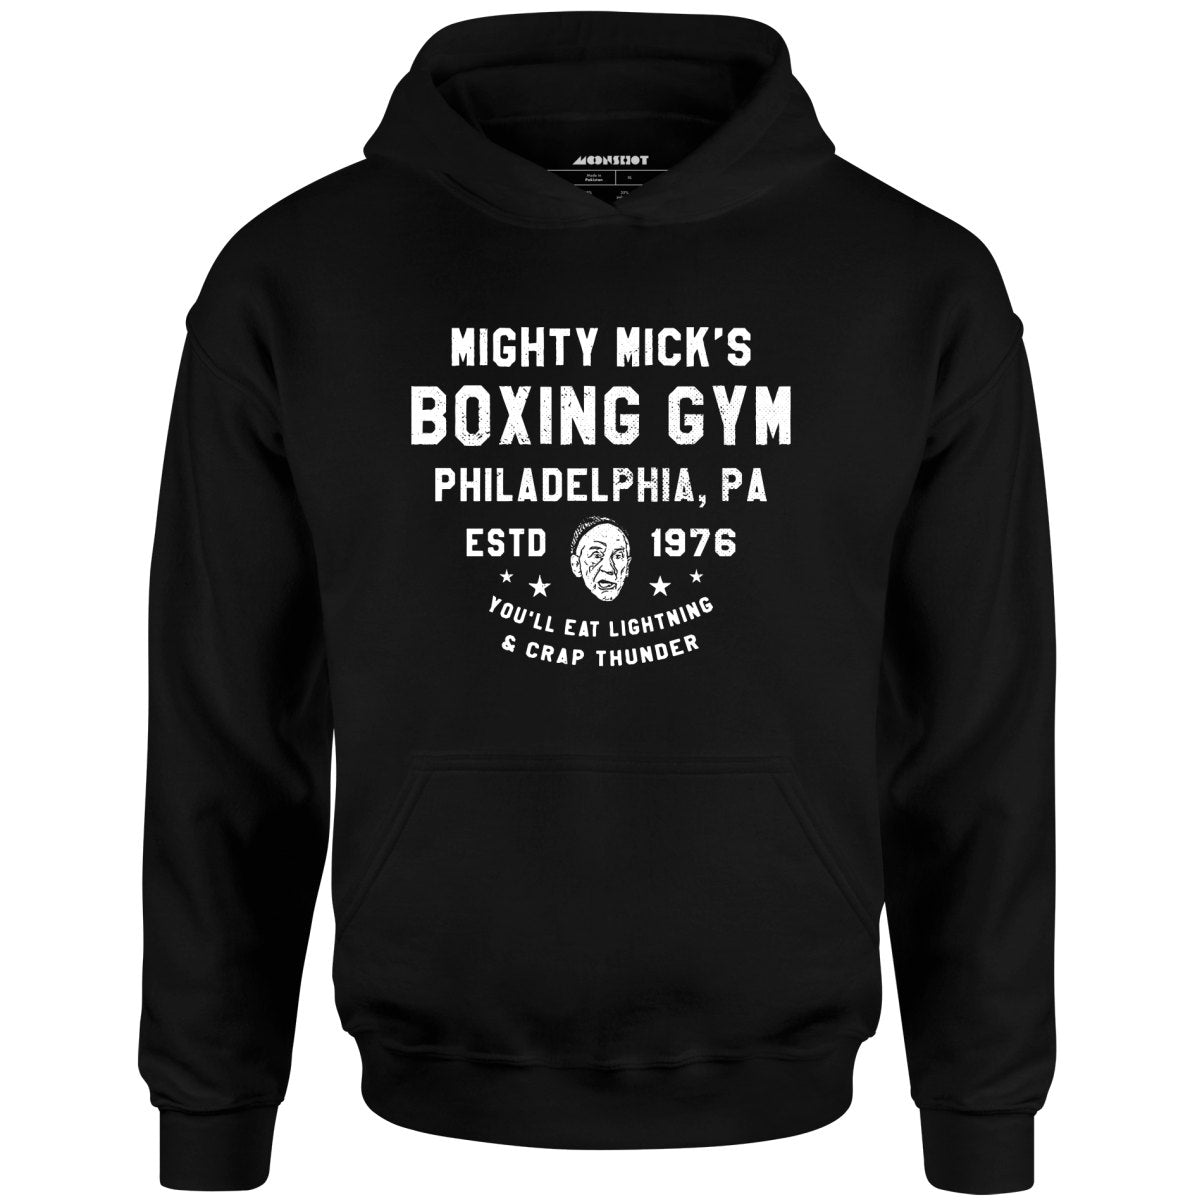 Mighty Mick's Boxing Gym - Unisex Hoodie